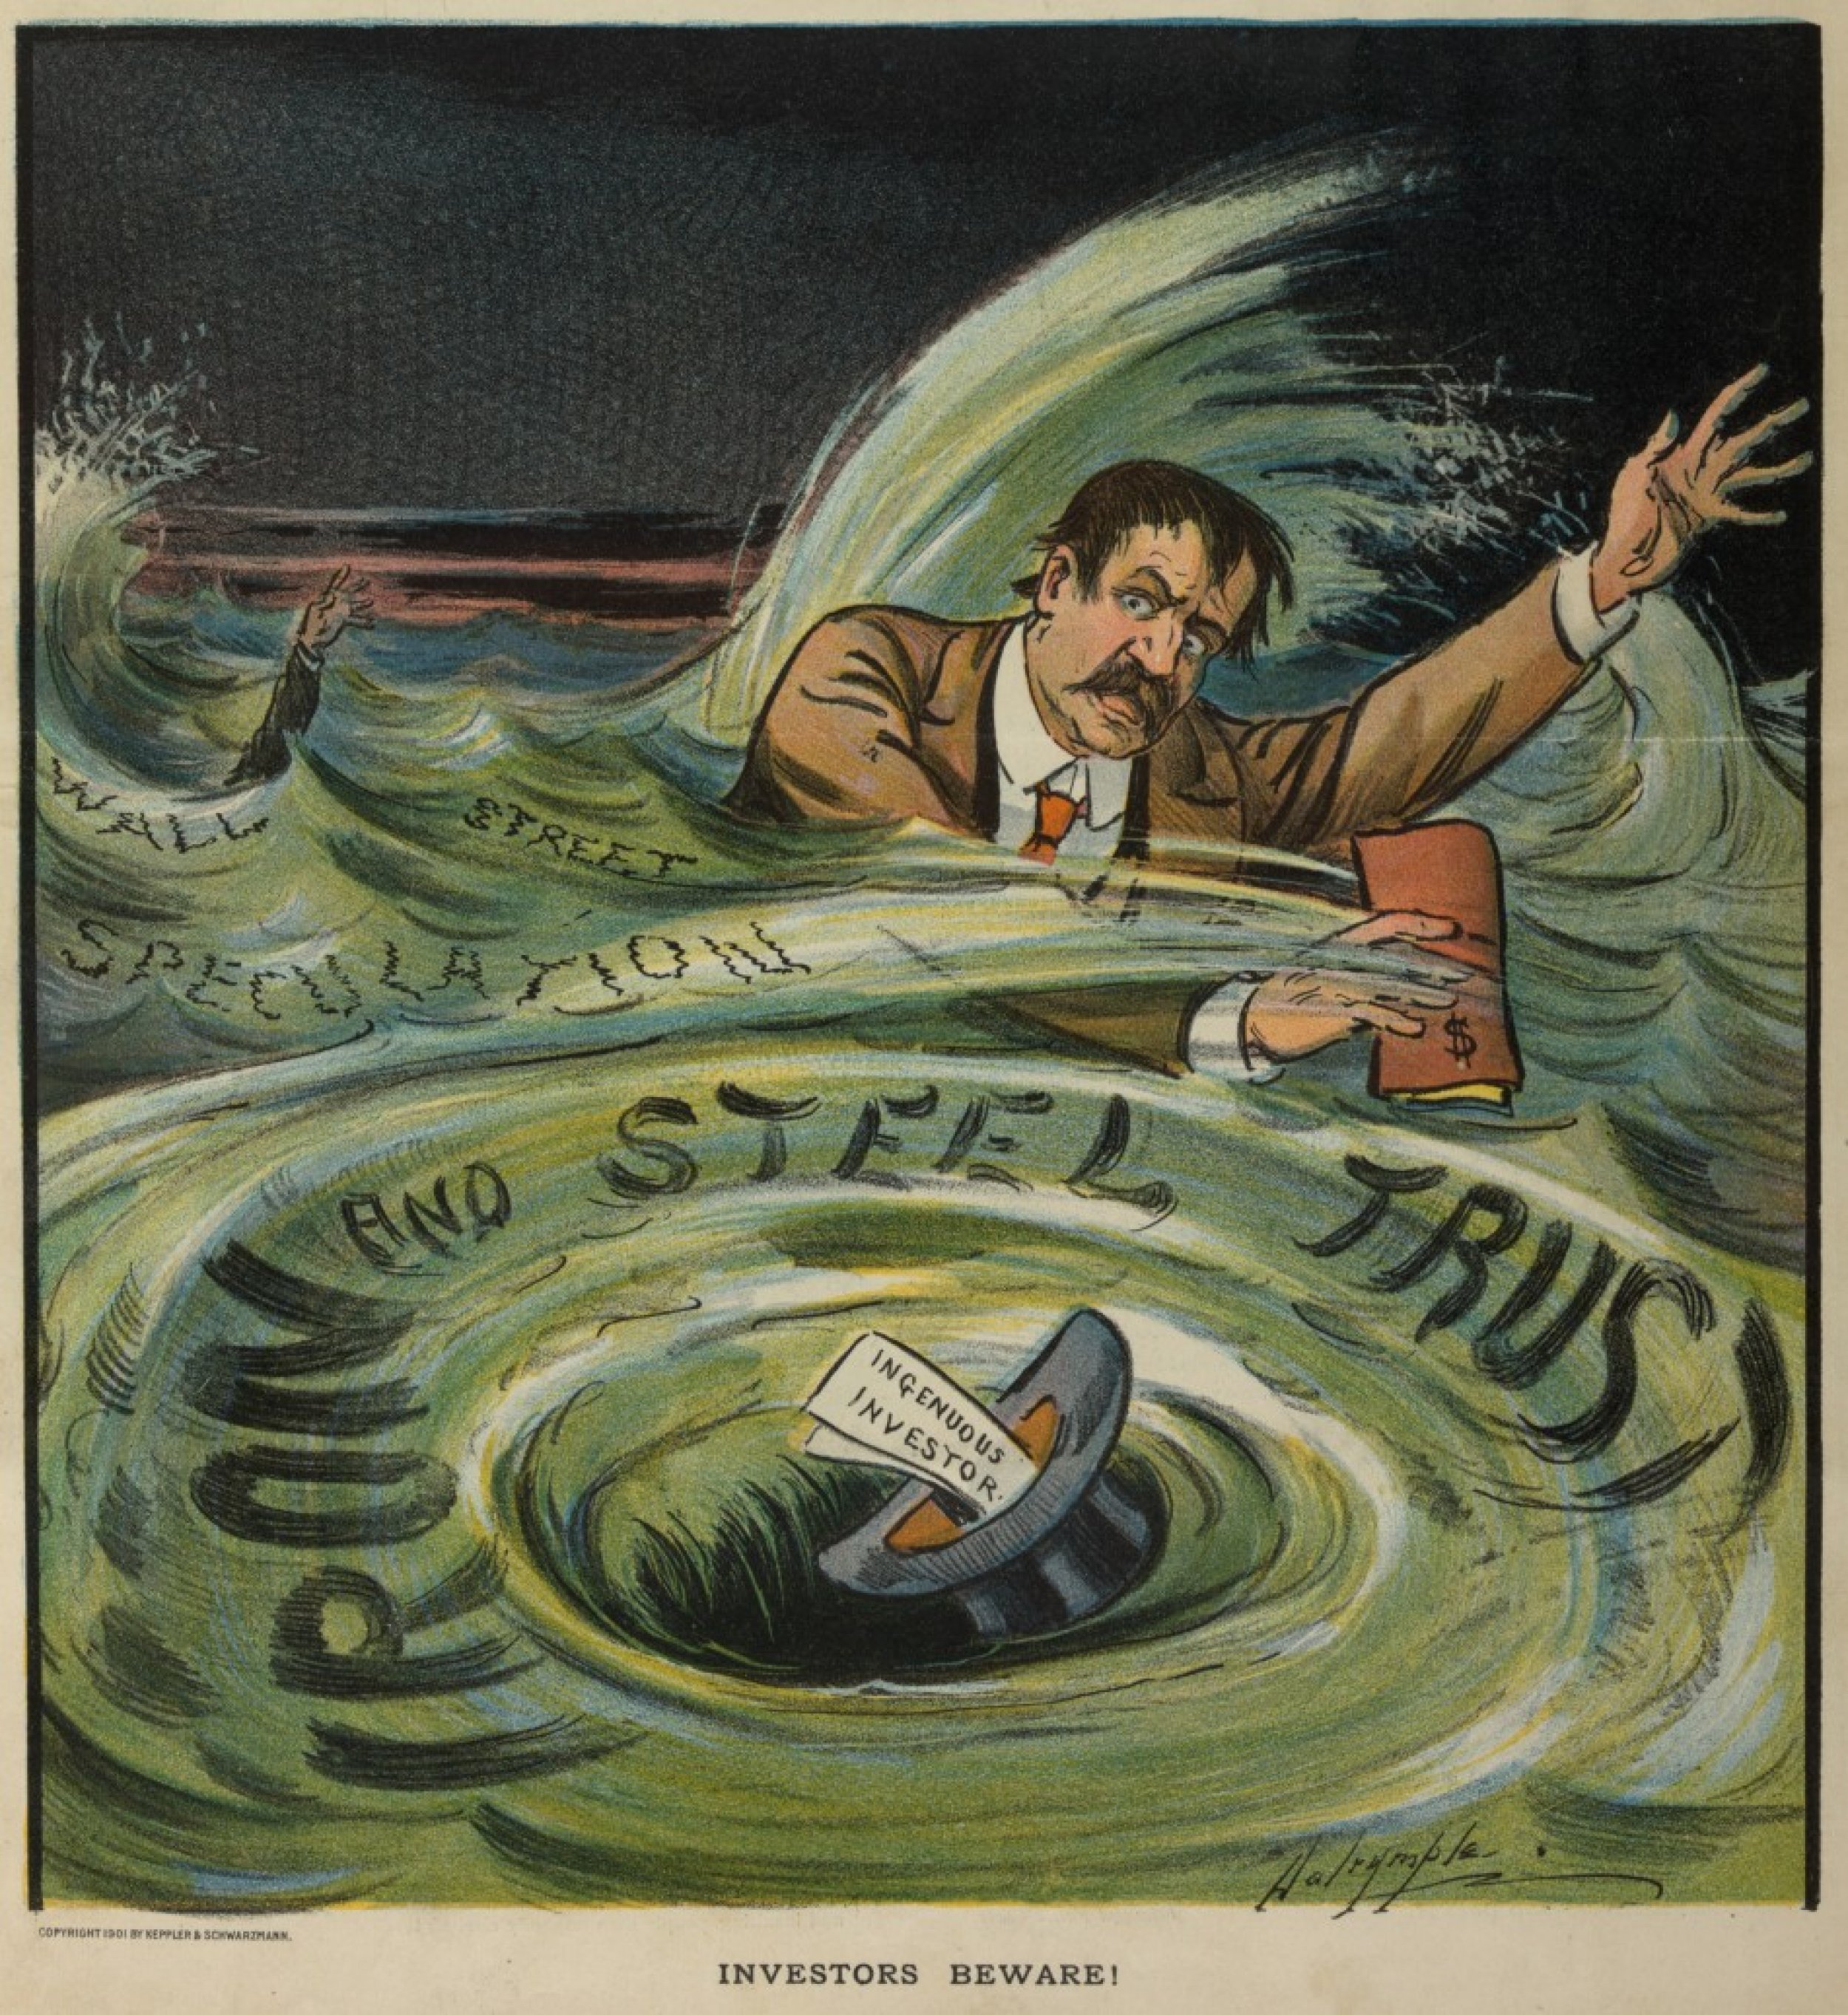 1901 Puck magazine cover image shows even tat the turn of the century, it was the industrial trusts who were blamed for wrecking investors fortunes on Wall Street